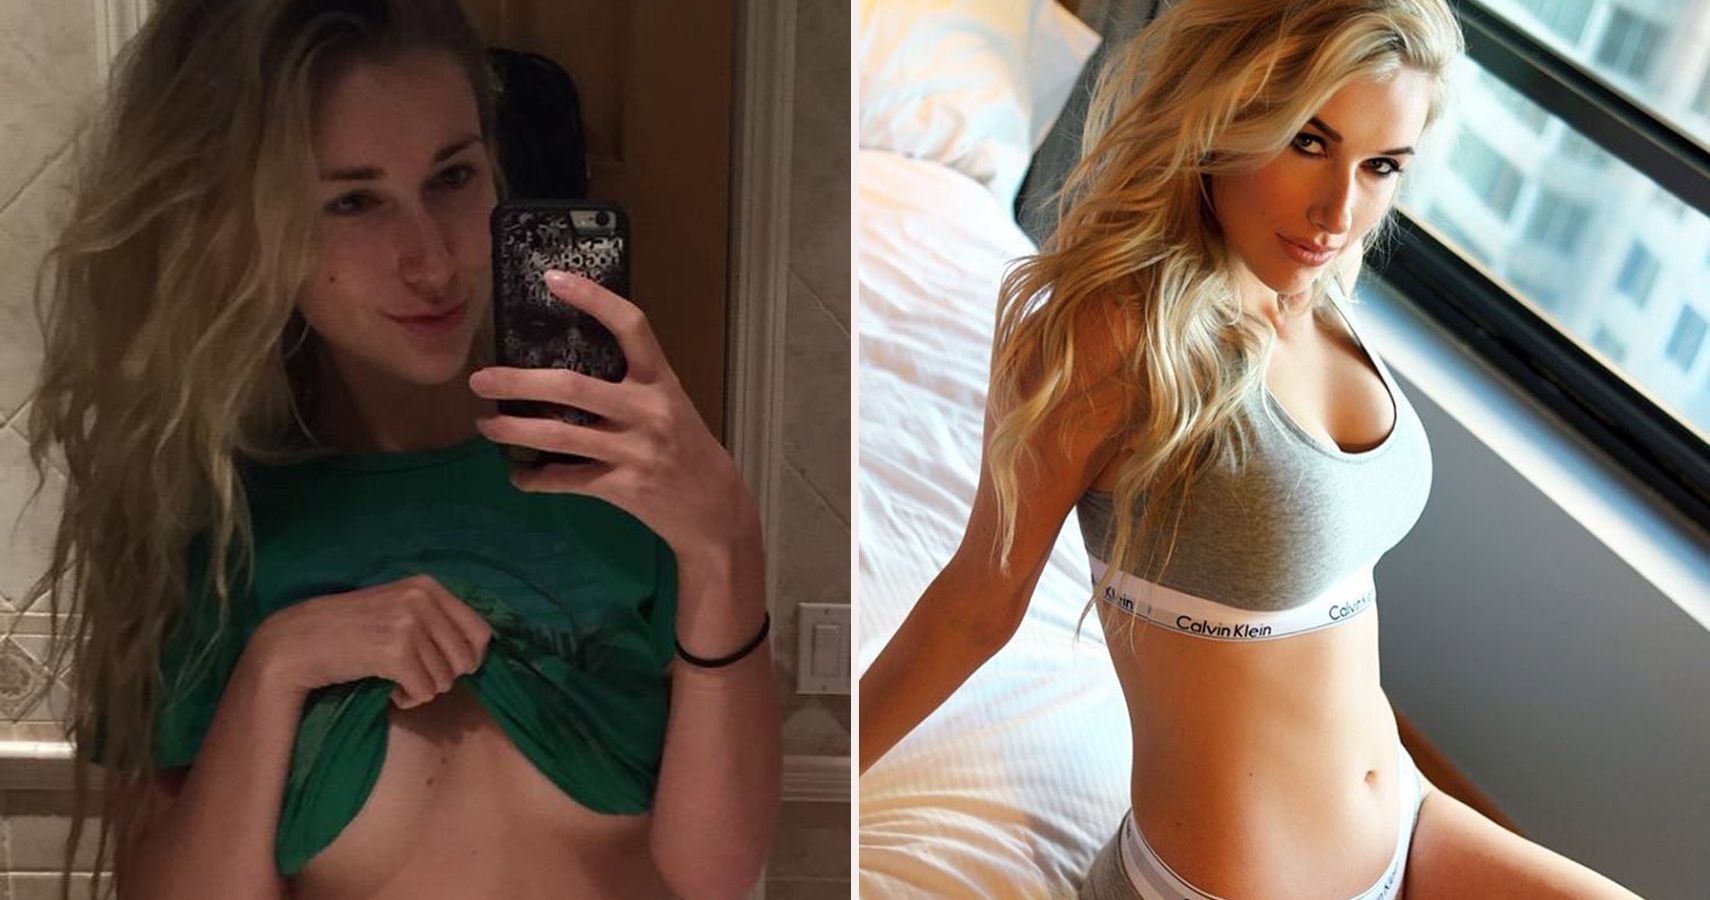 15 Hot Pictures The WWE Doesn't Want You To See Of Noelle Foley.